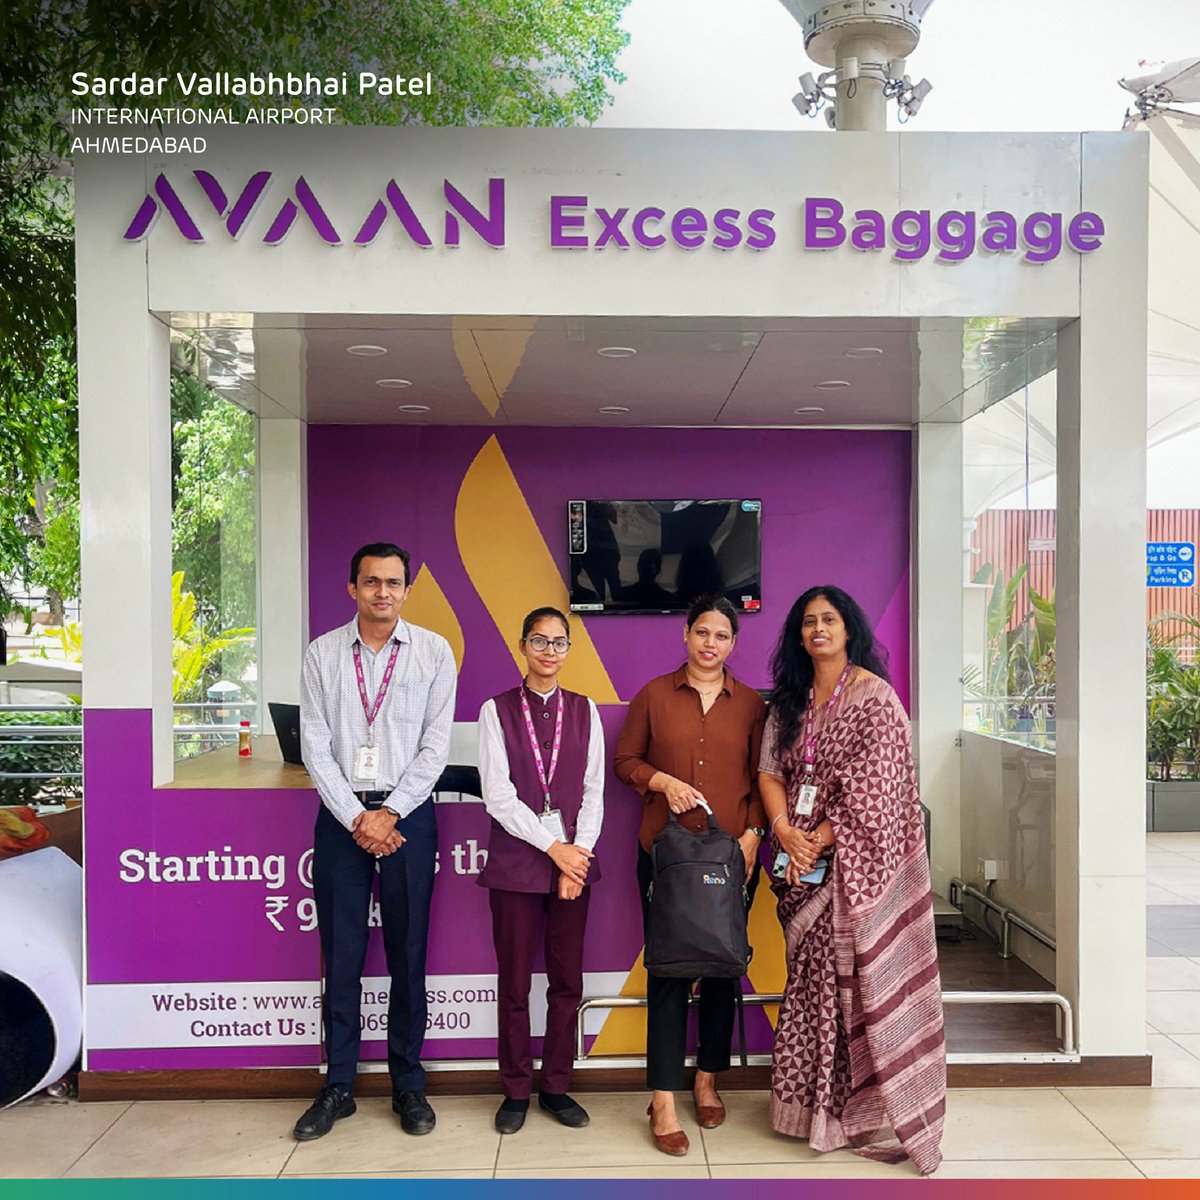 At #SVPIA, our goal is to provide a safe and seamless travel experience for all our guests. In our recent collaboration with Avaan Excess, we now offer a service allowing passengers to retrieve their lost luggage through a delivery service directly to their location. 

(1/2)